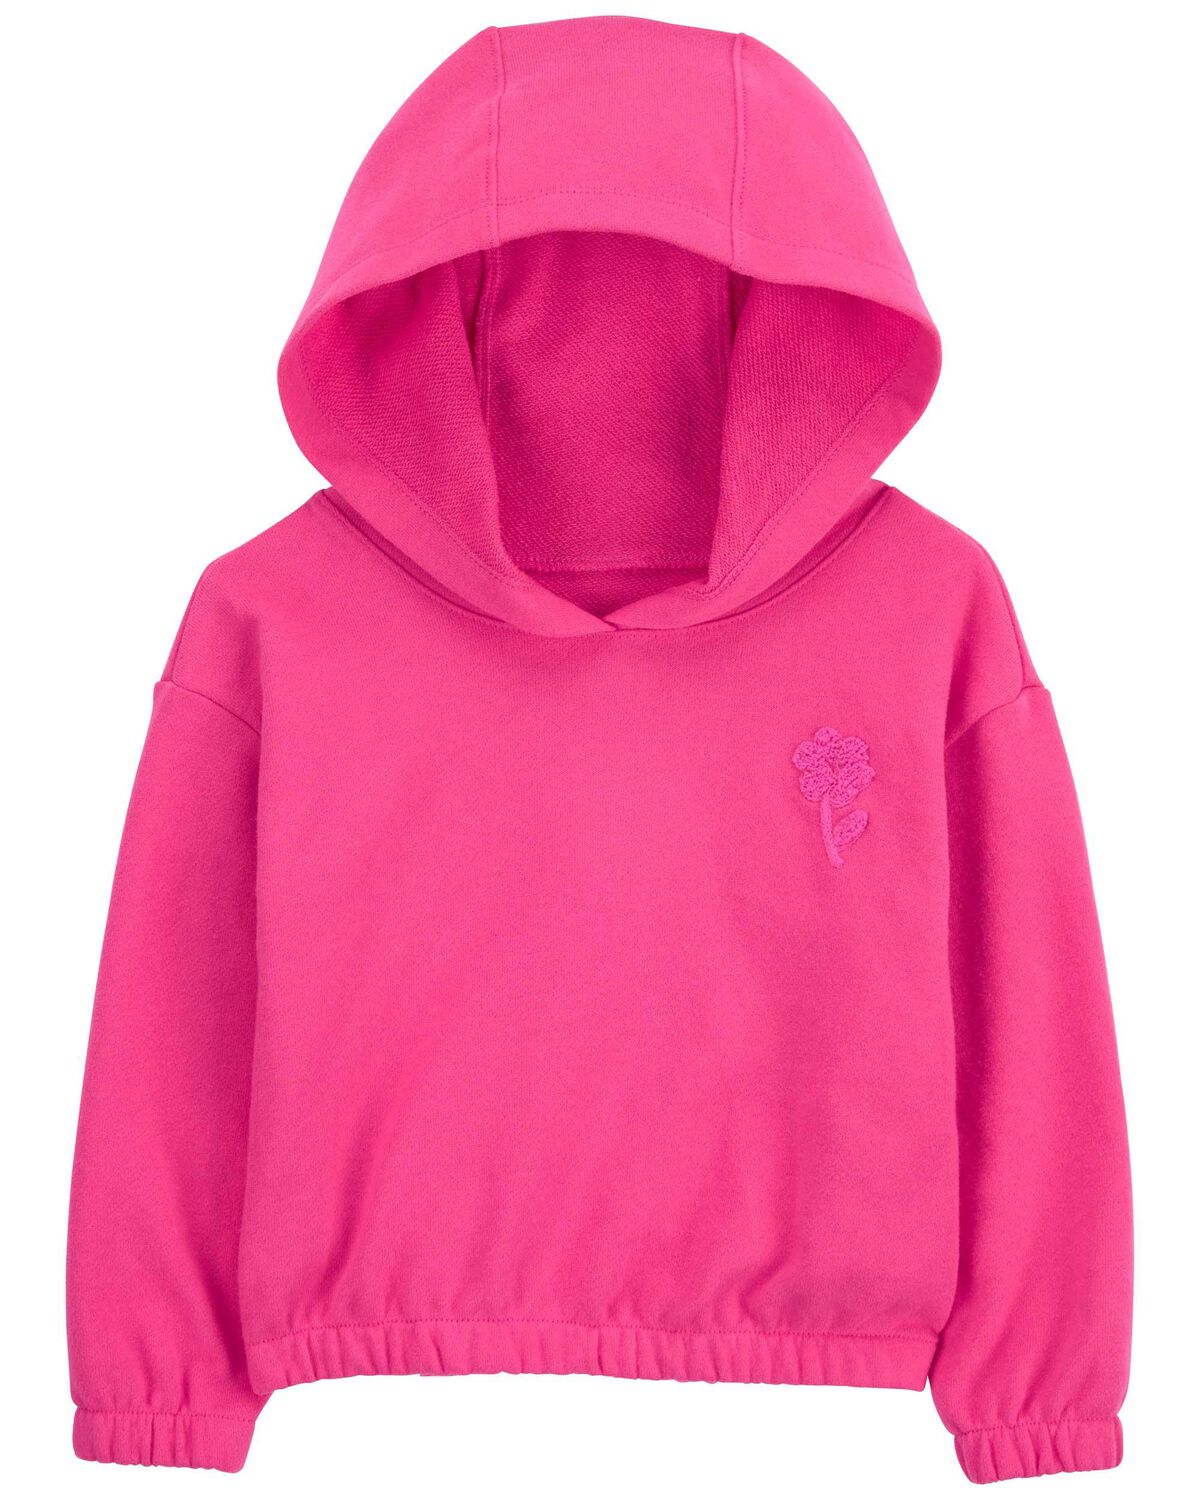 Pink Toddler Hooded French Terry Top | carters.com